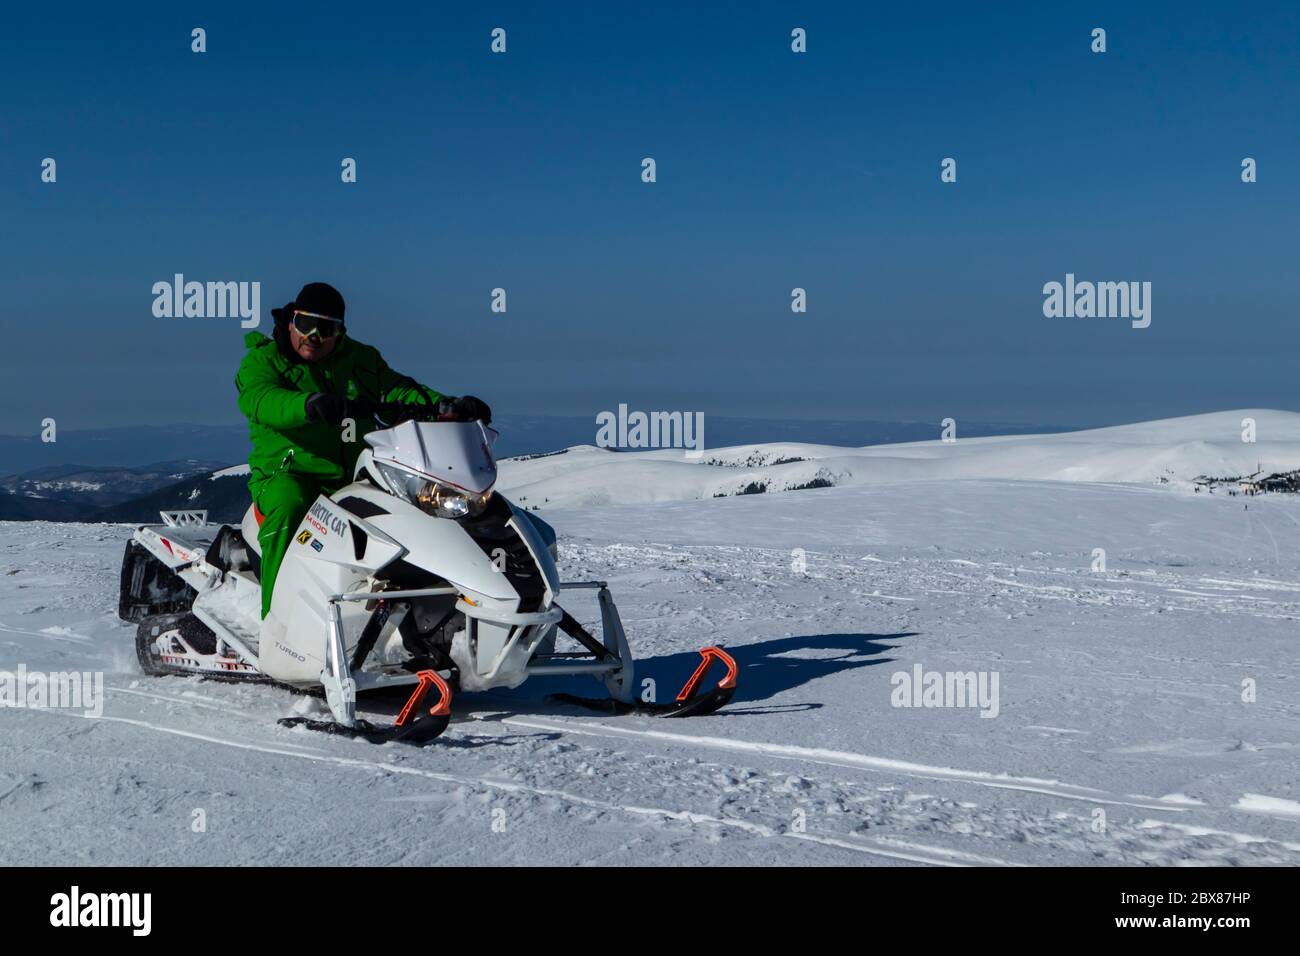 Rider on the snowmobile in the mountains ski resort. A man is riding snowmobile in mountains Stock Photo